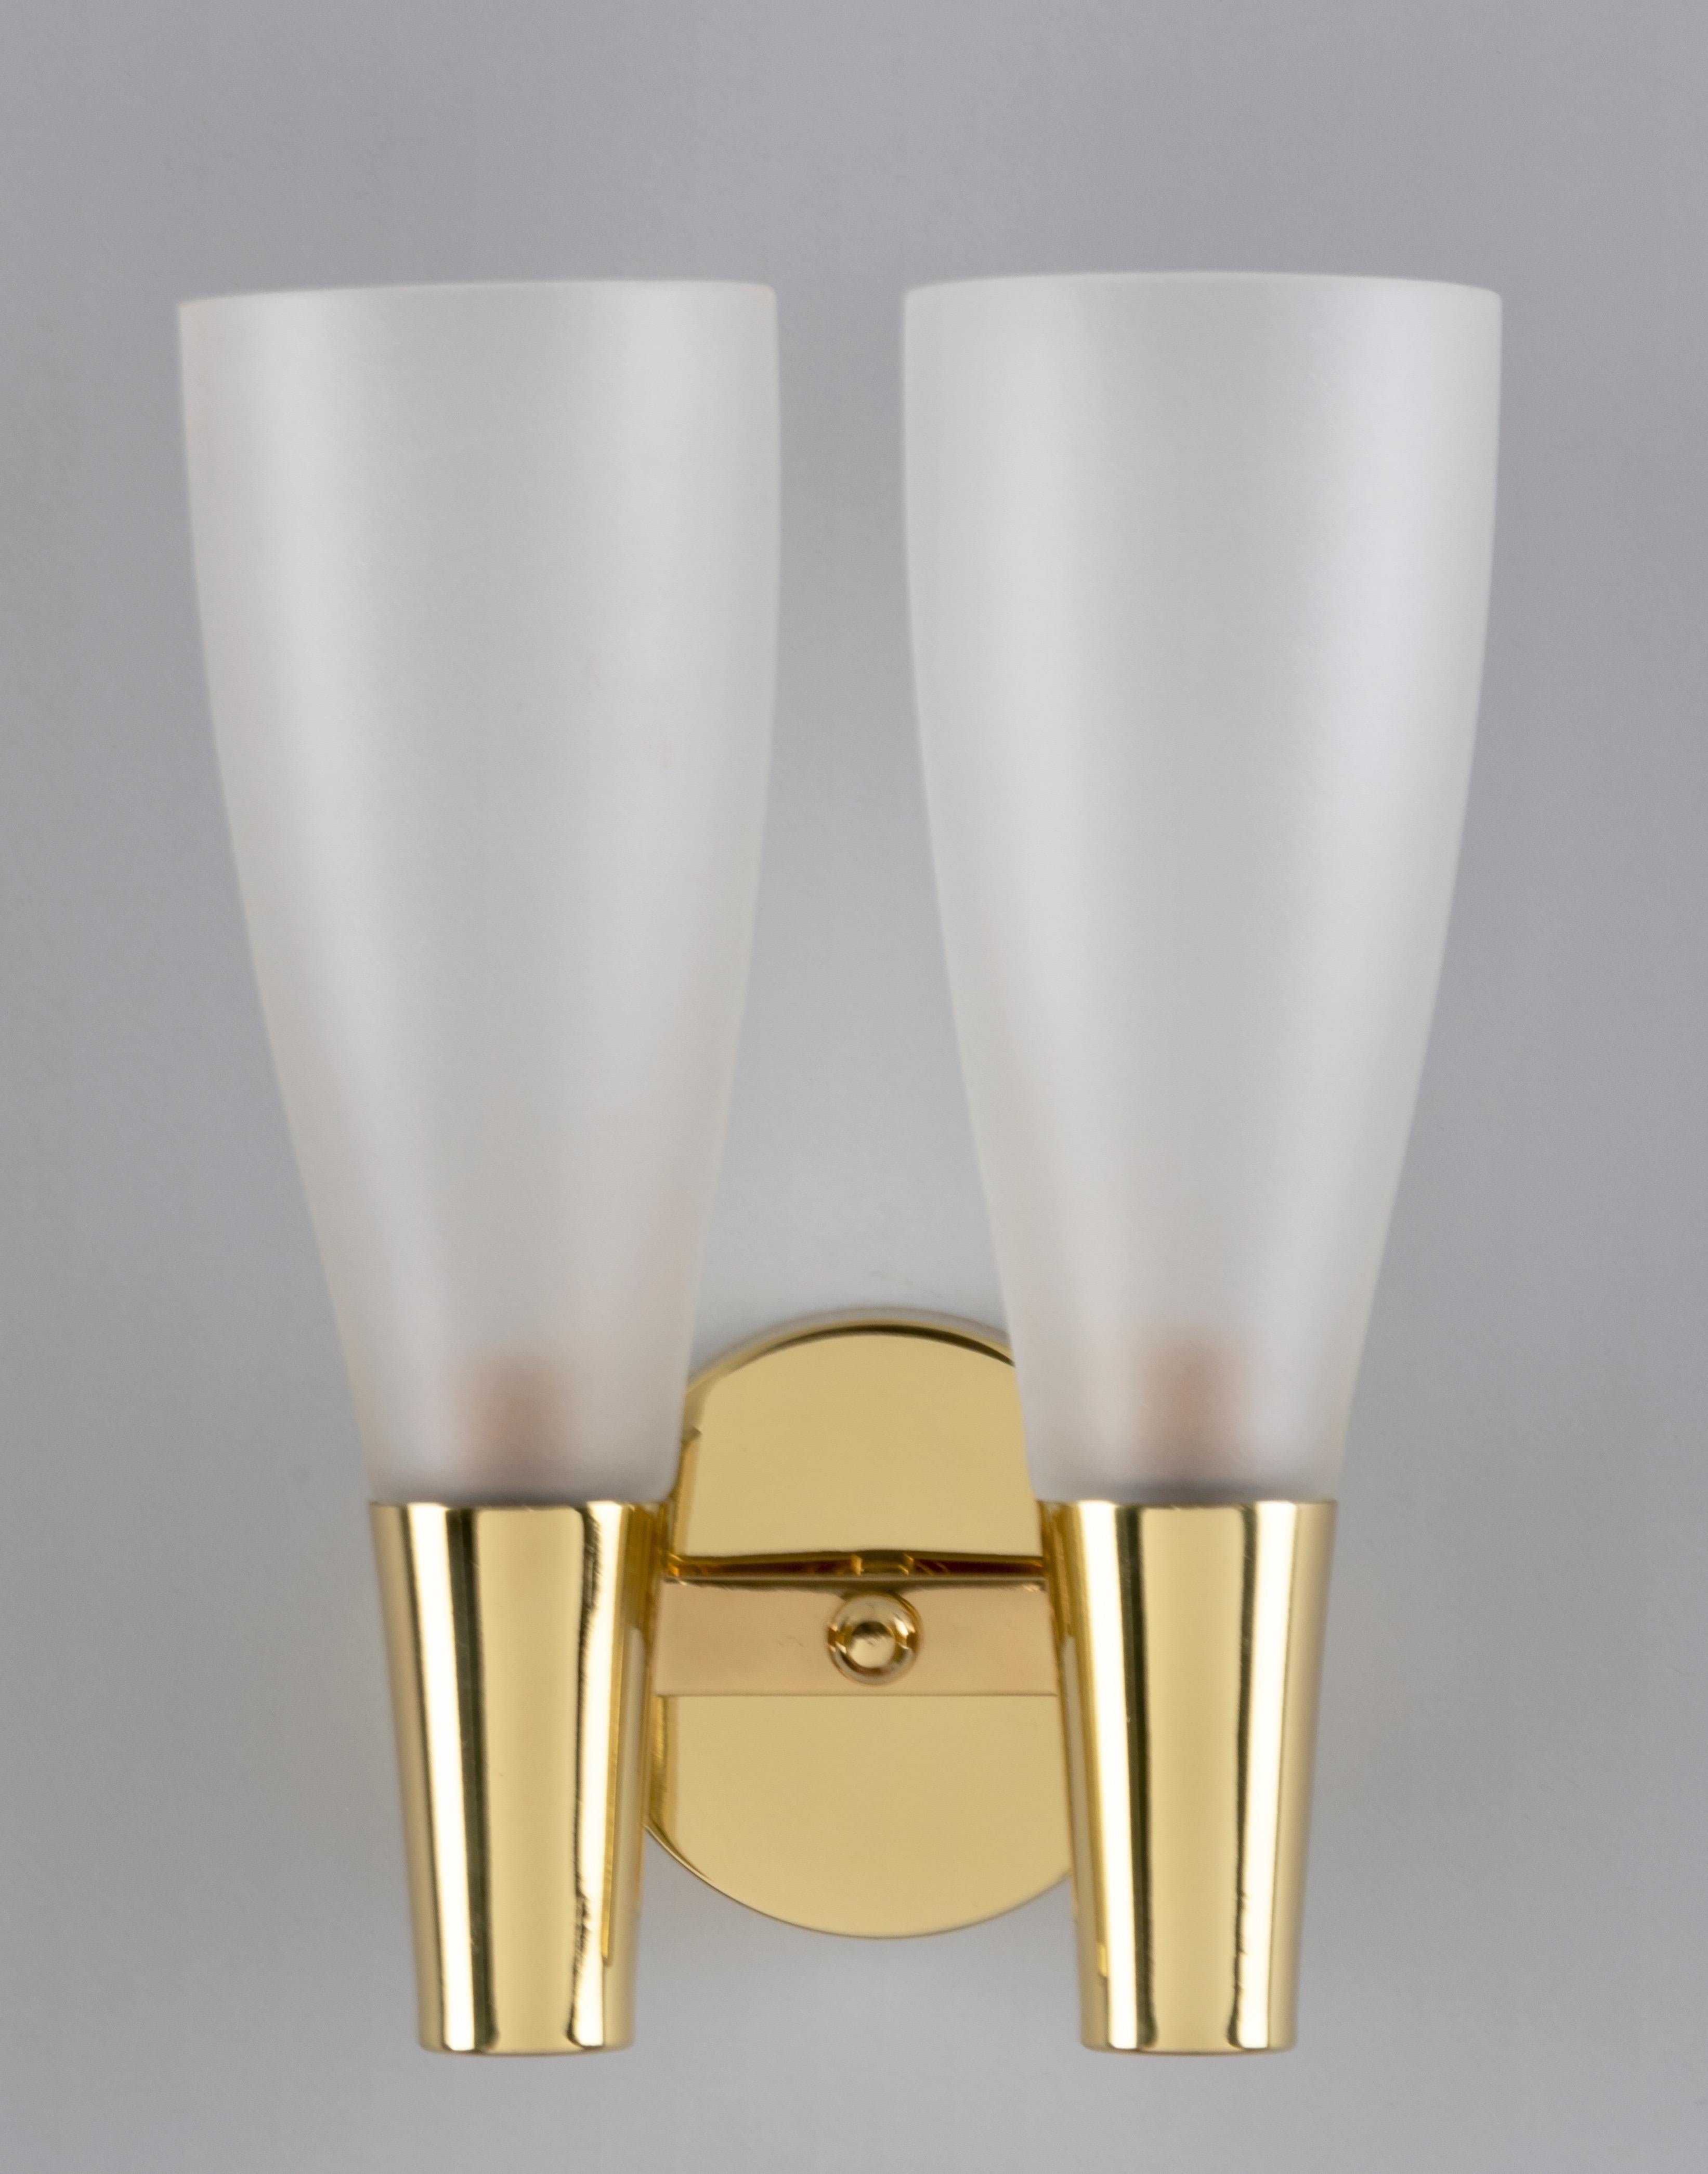 Italian Pietro Chiesa for Fontana Arte Brass Sconces with Two Glass Shades, Italy 1940s